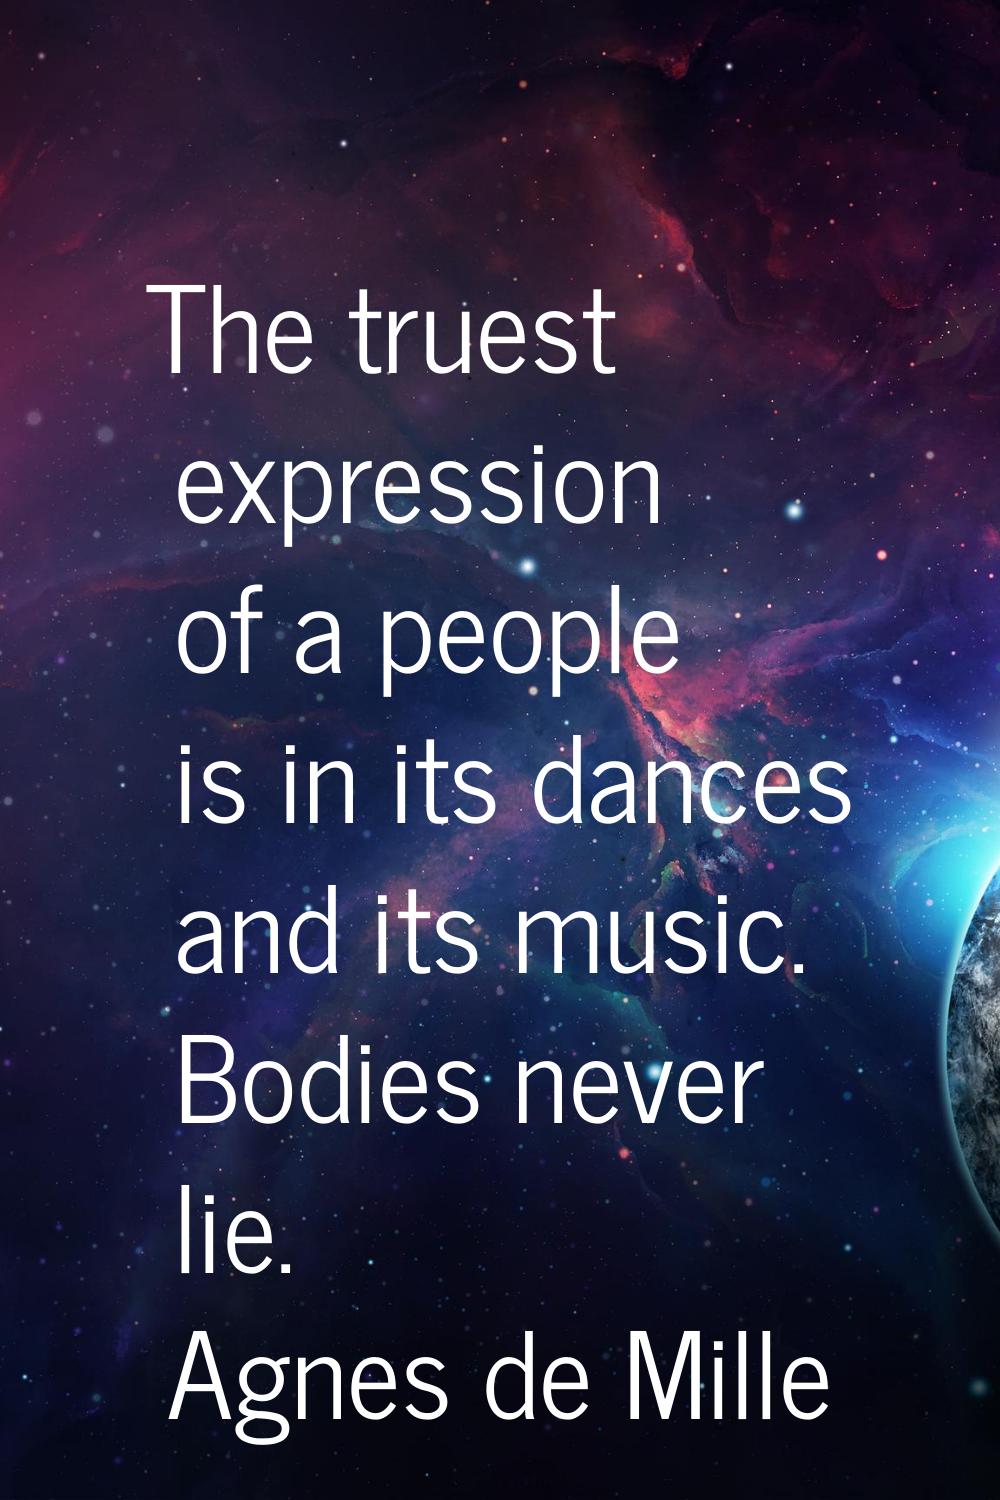 The truest expression of a people is in its dances and its music. Bodies never lie.